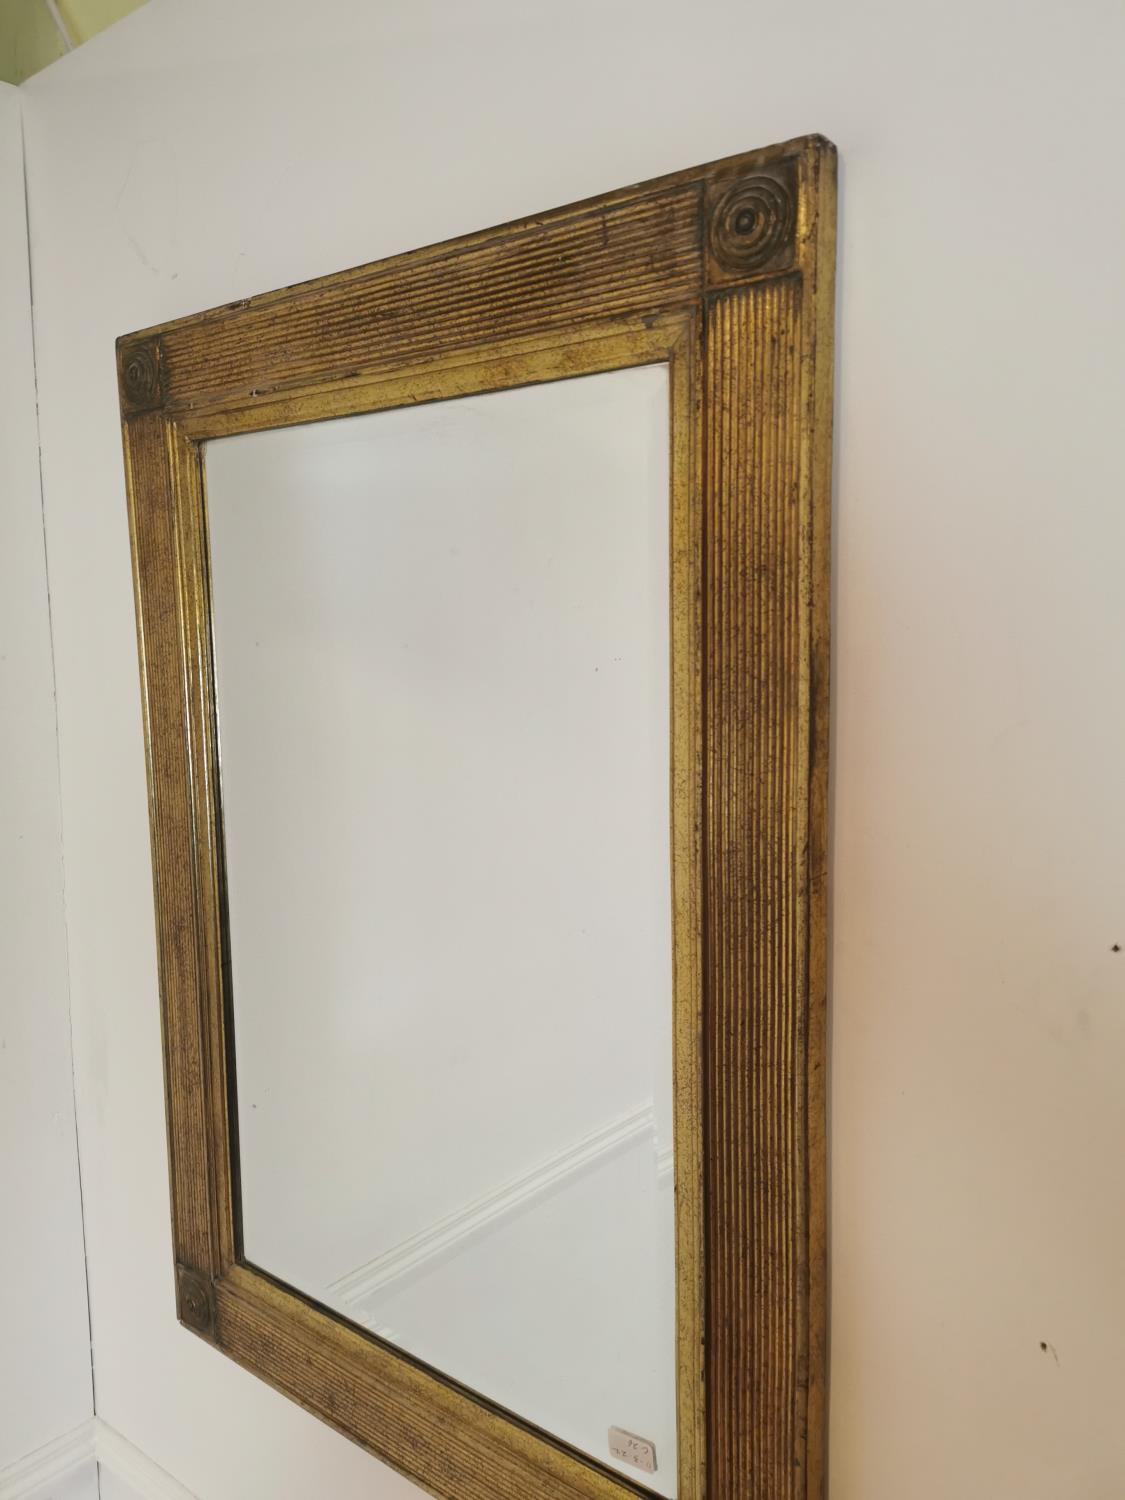 Gilt wall mirror in the Regency style - Image 4 of 4